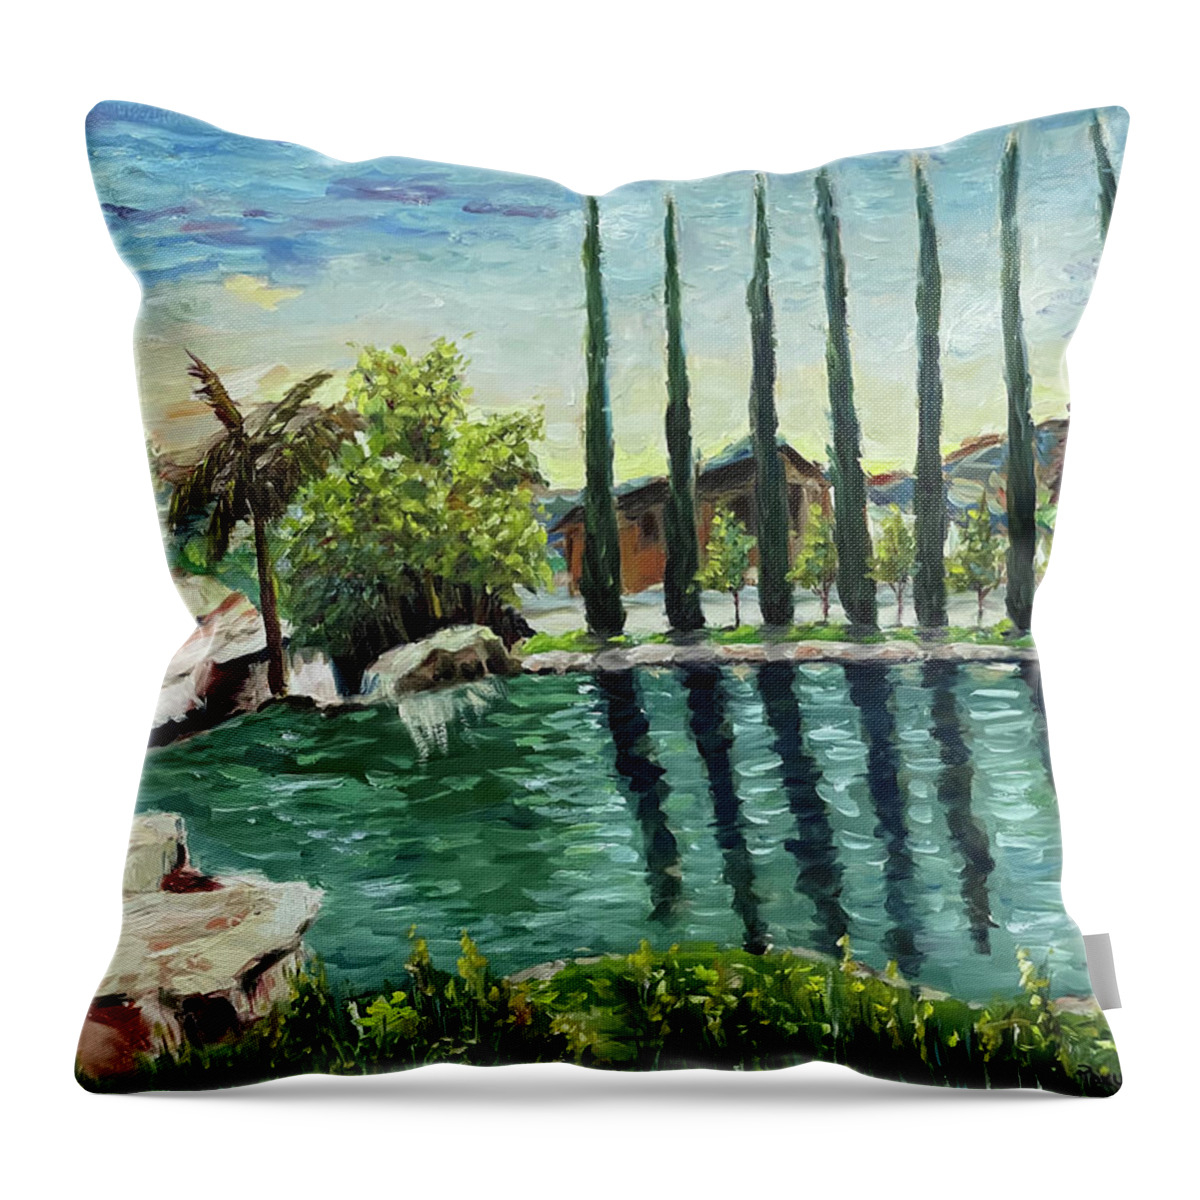 Gershon Bachus Vintners Throw Pillow featuring the painting The Pond at Gershon Bachus Vintners Temecula by Roxy Rich